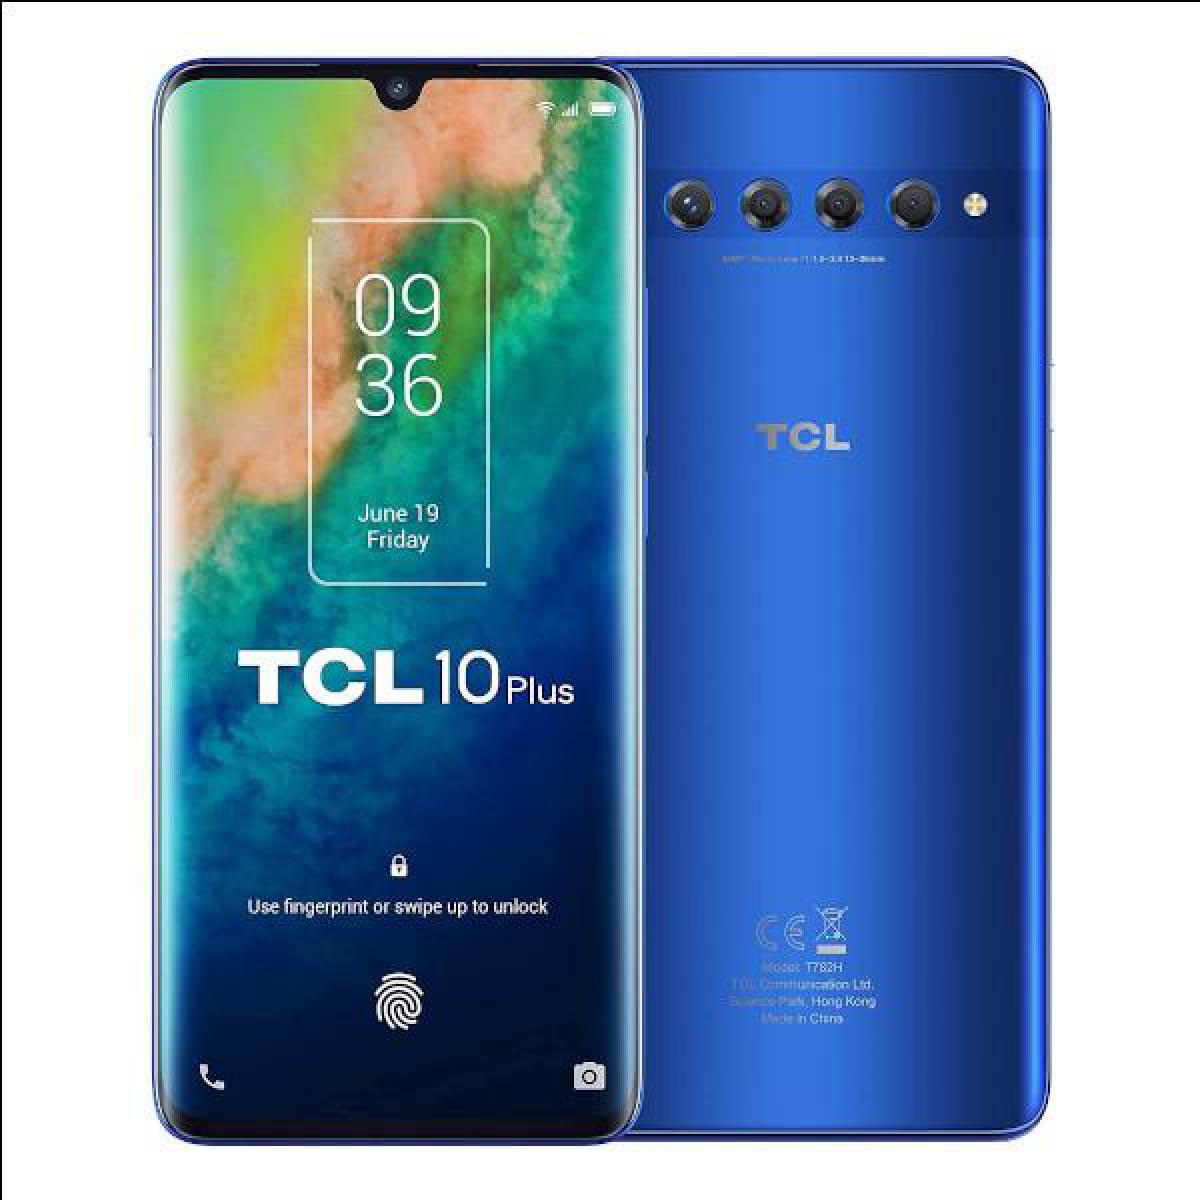 TCL - Smartphone TCL 10 Plus - Smartphone Android